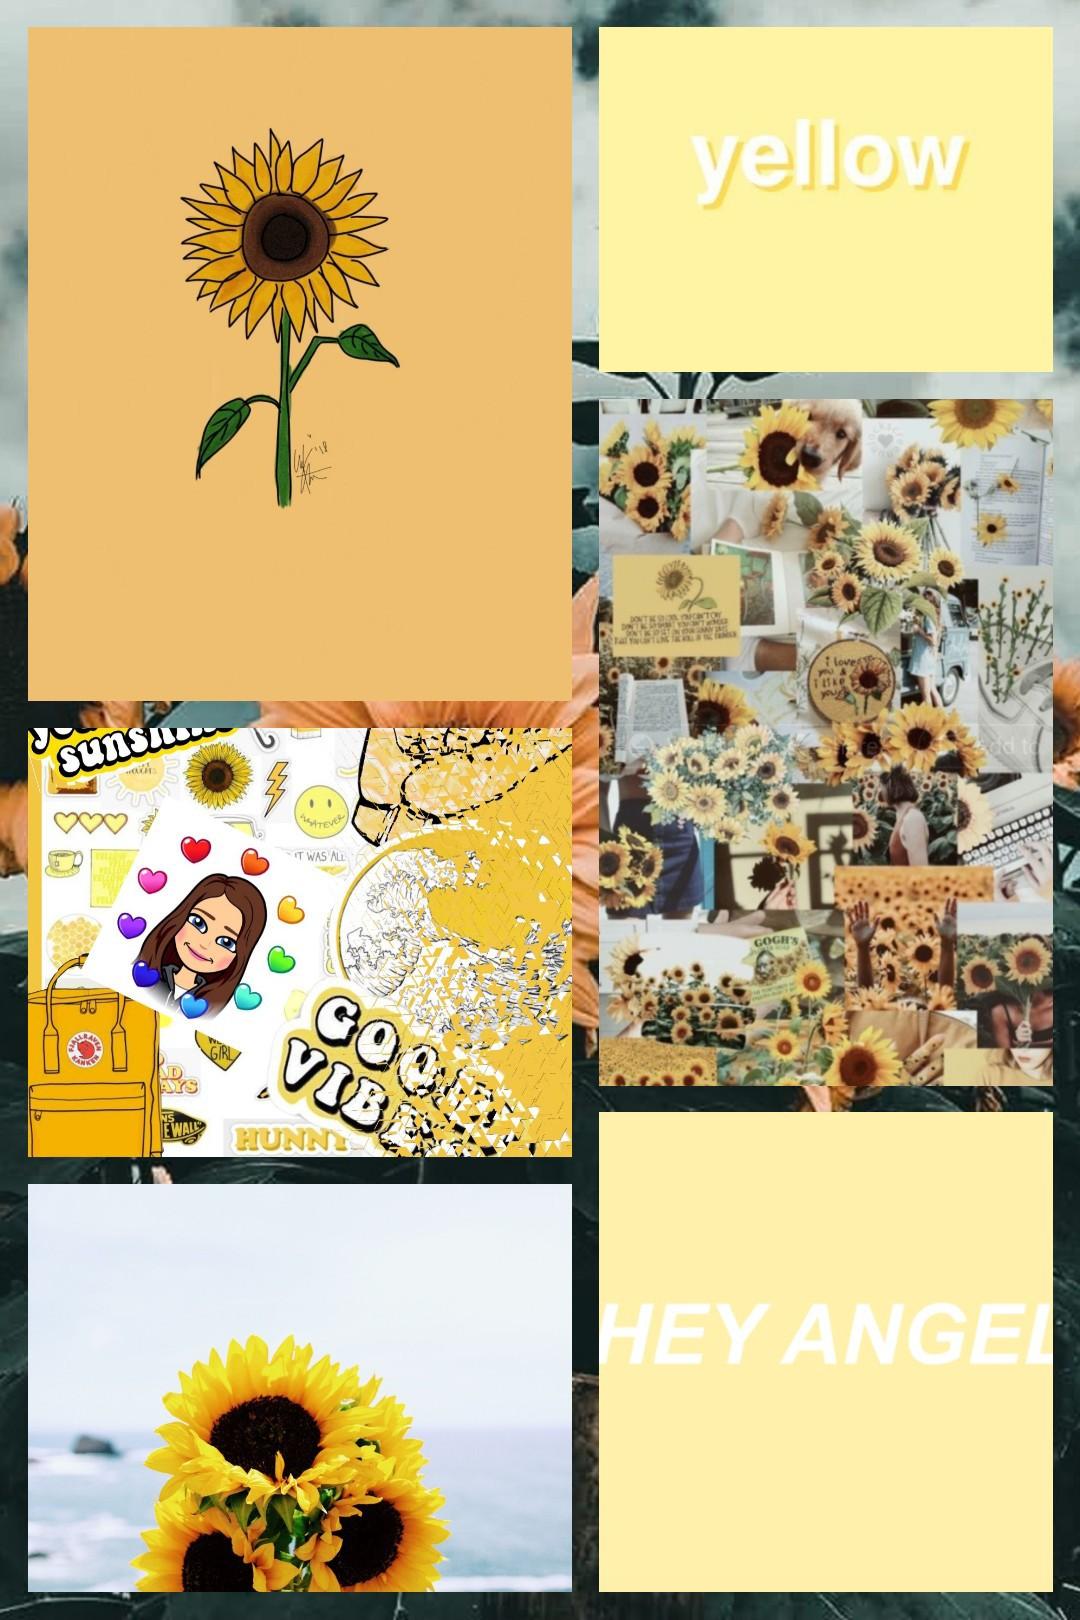 #SunflowerVibes
#YellowCollage
#PicCollage
#FollowMePlease